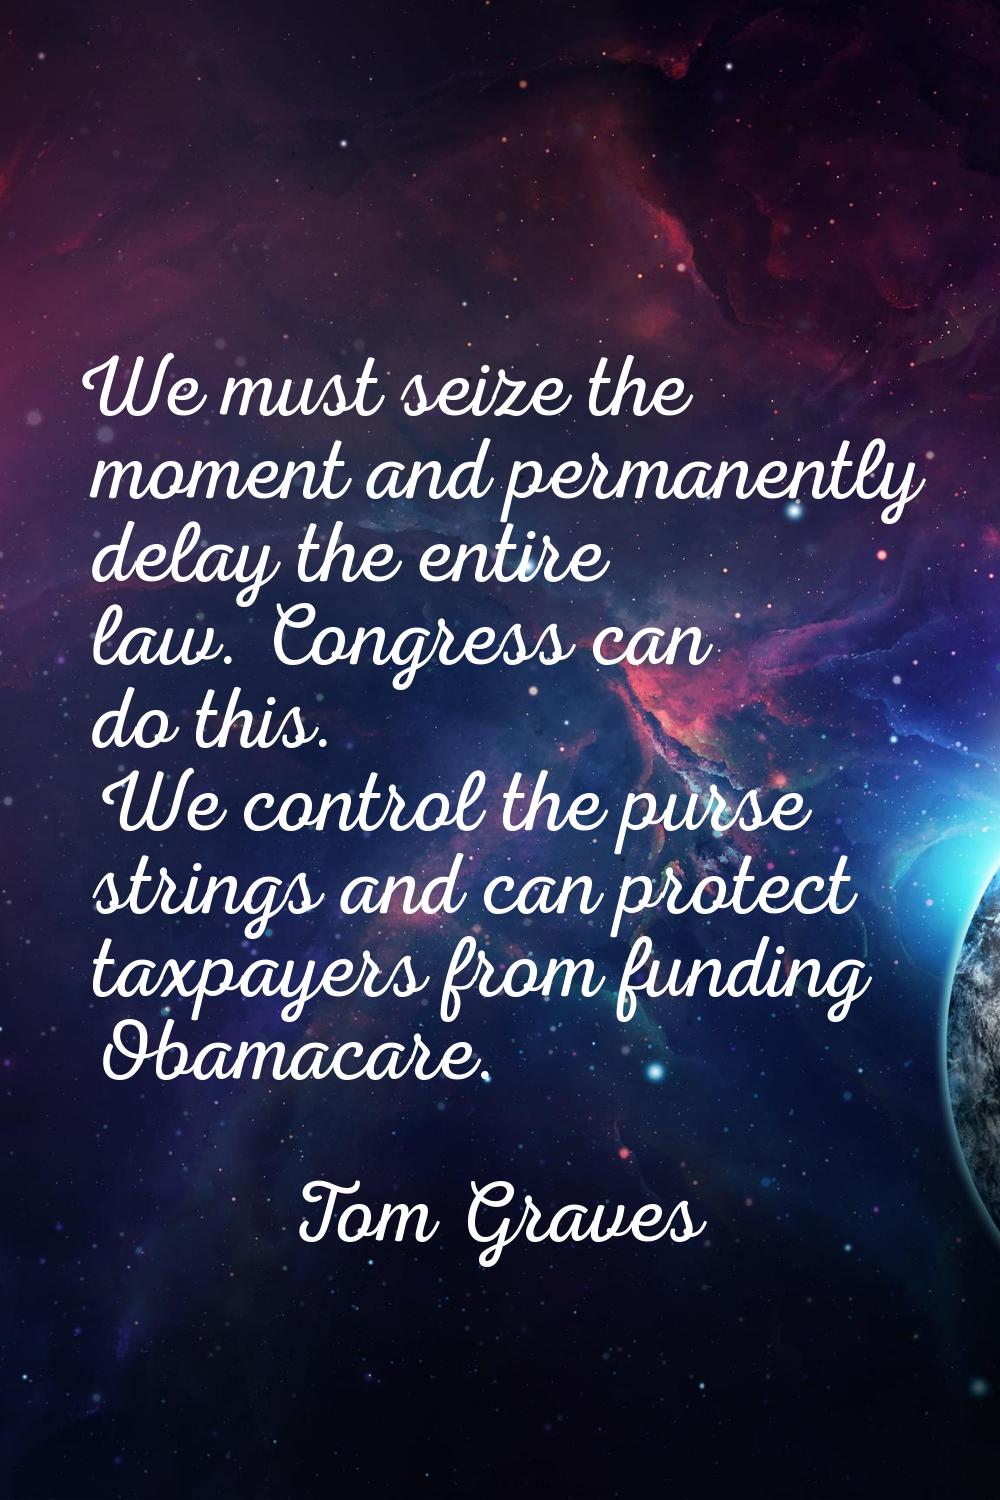 We must seize the moment and permanently delay the entire law. Congress can do this. We control the